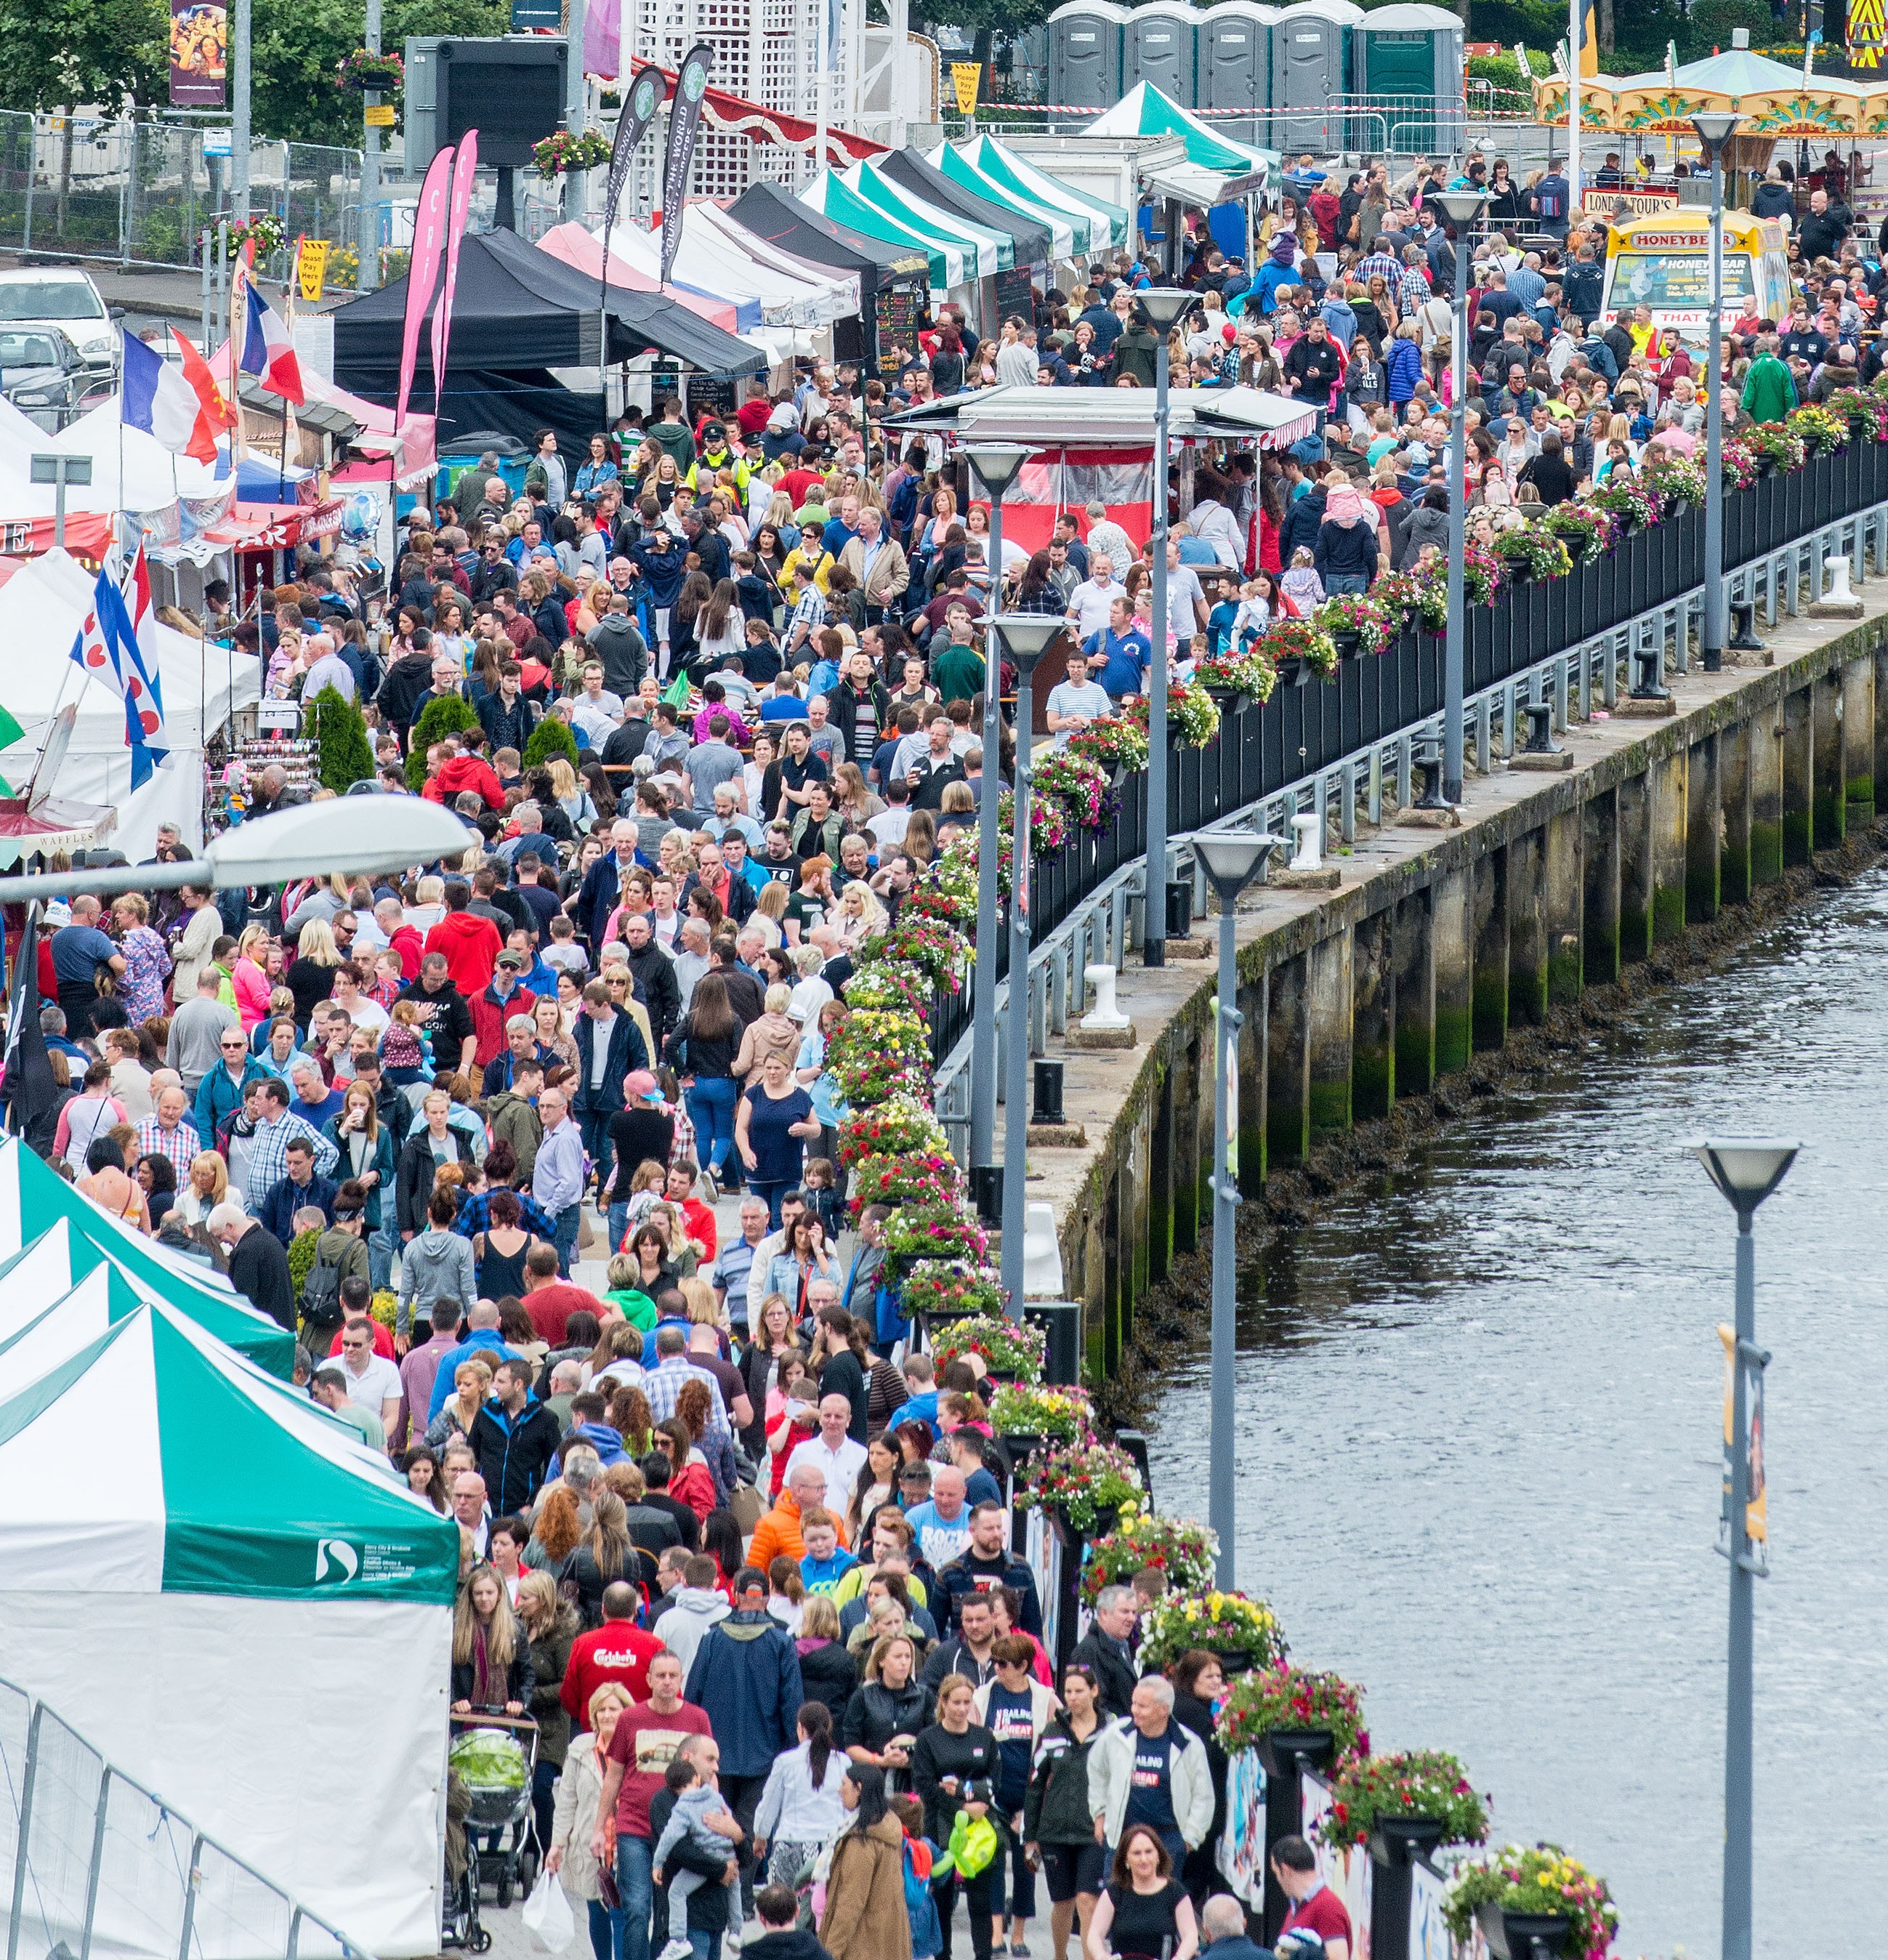 Visitors flock to the 2016 Foyle Maritime Festival on opening weekend